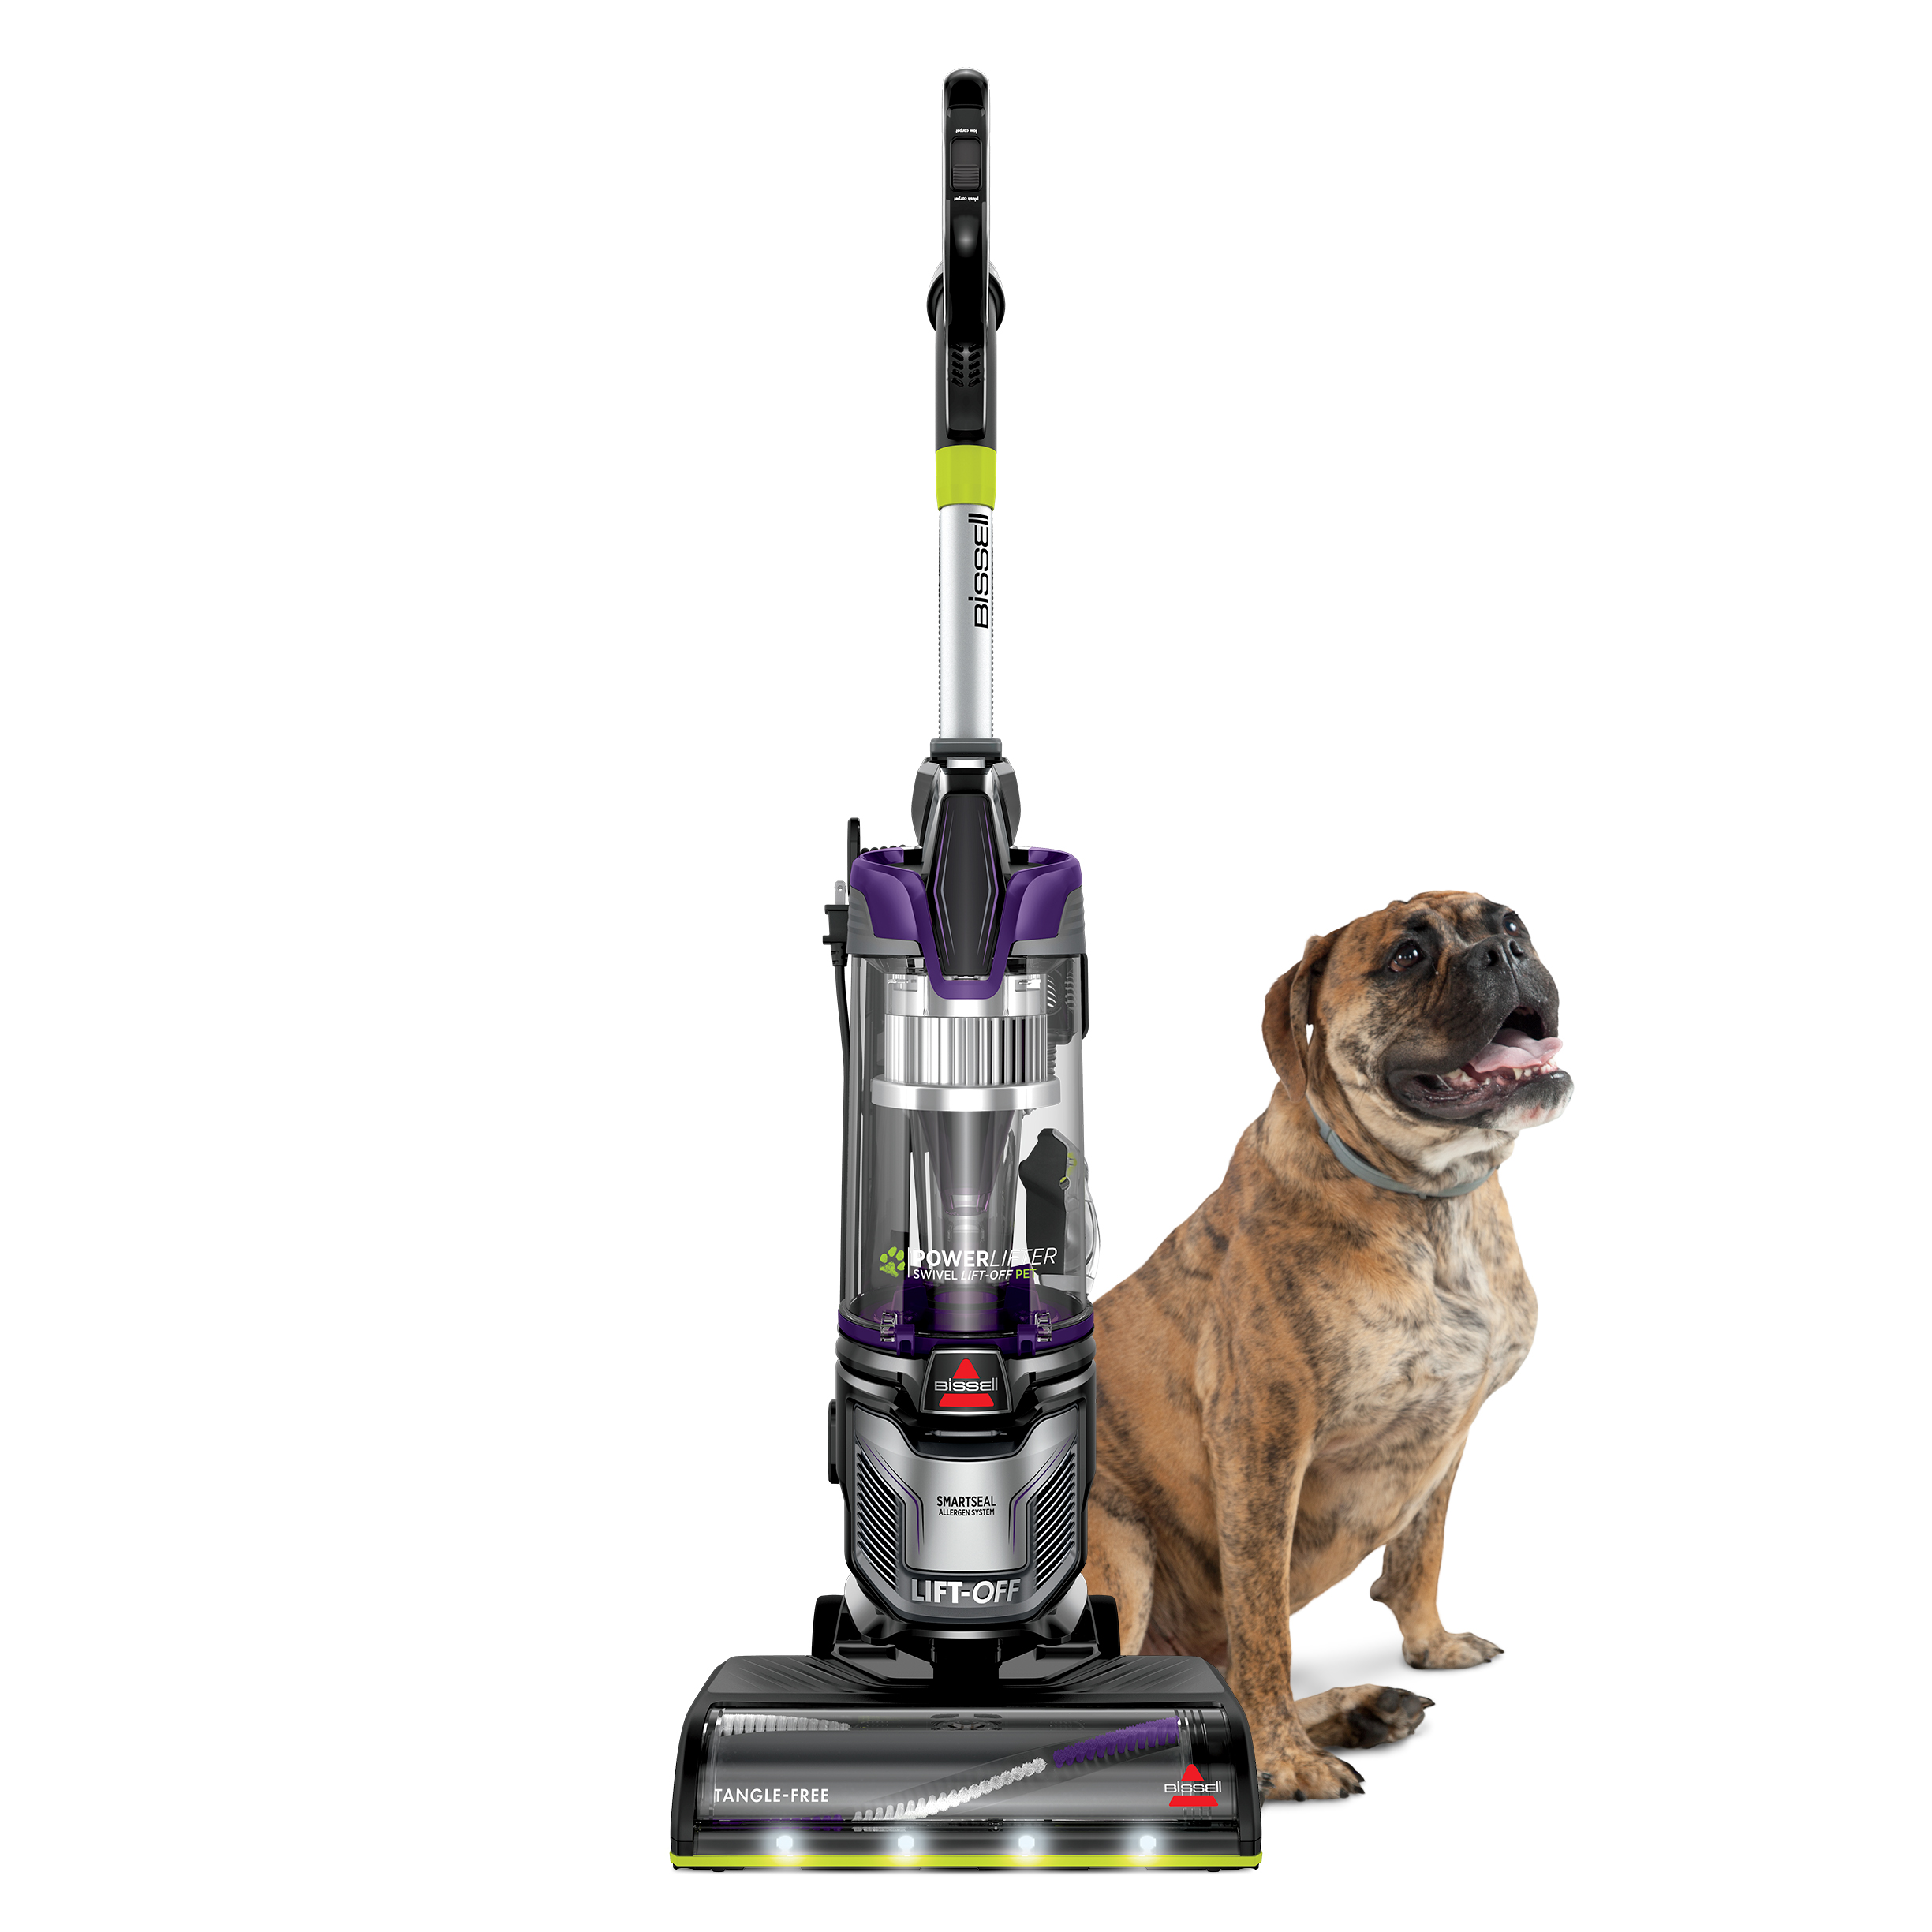 BISSELL PowerLifter Swivel Lift-Off Pet Upright Vacuum 2920F - image 2 of 8